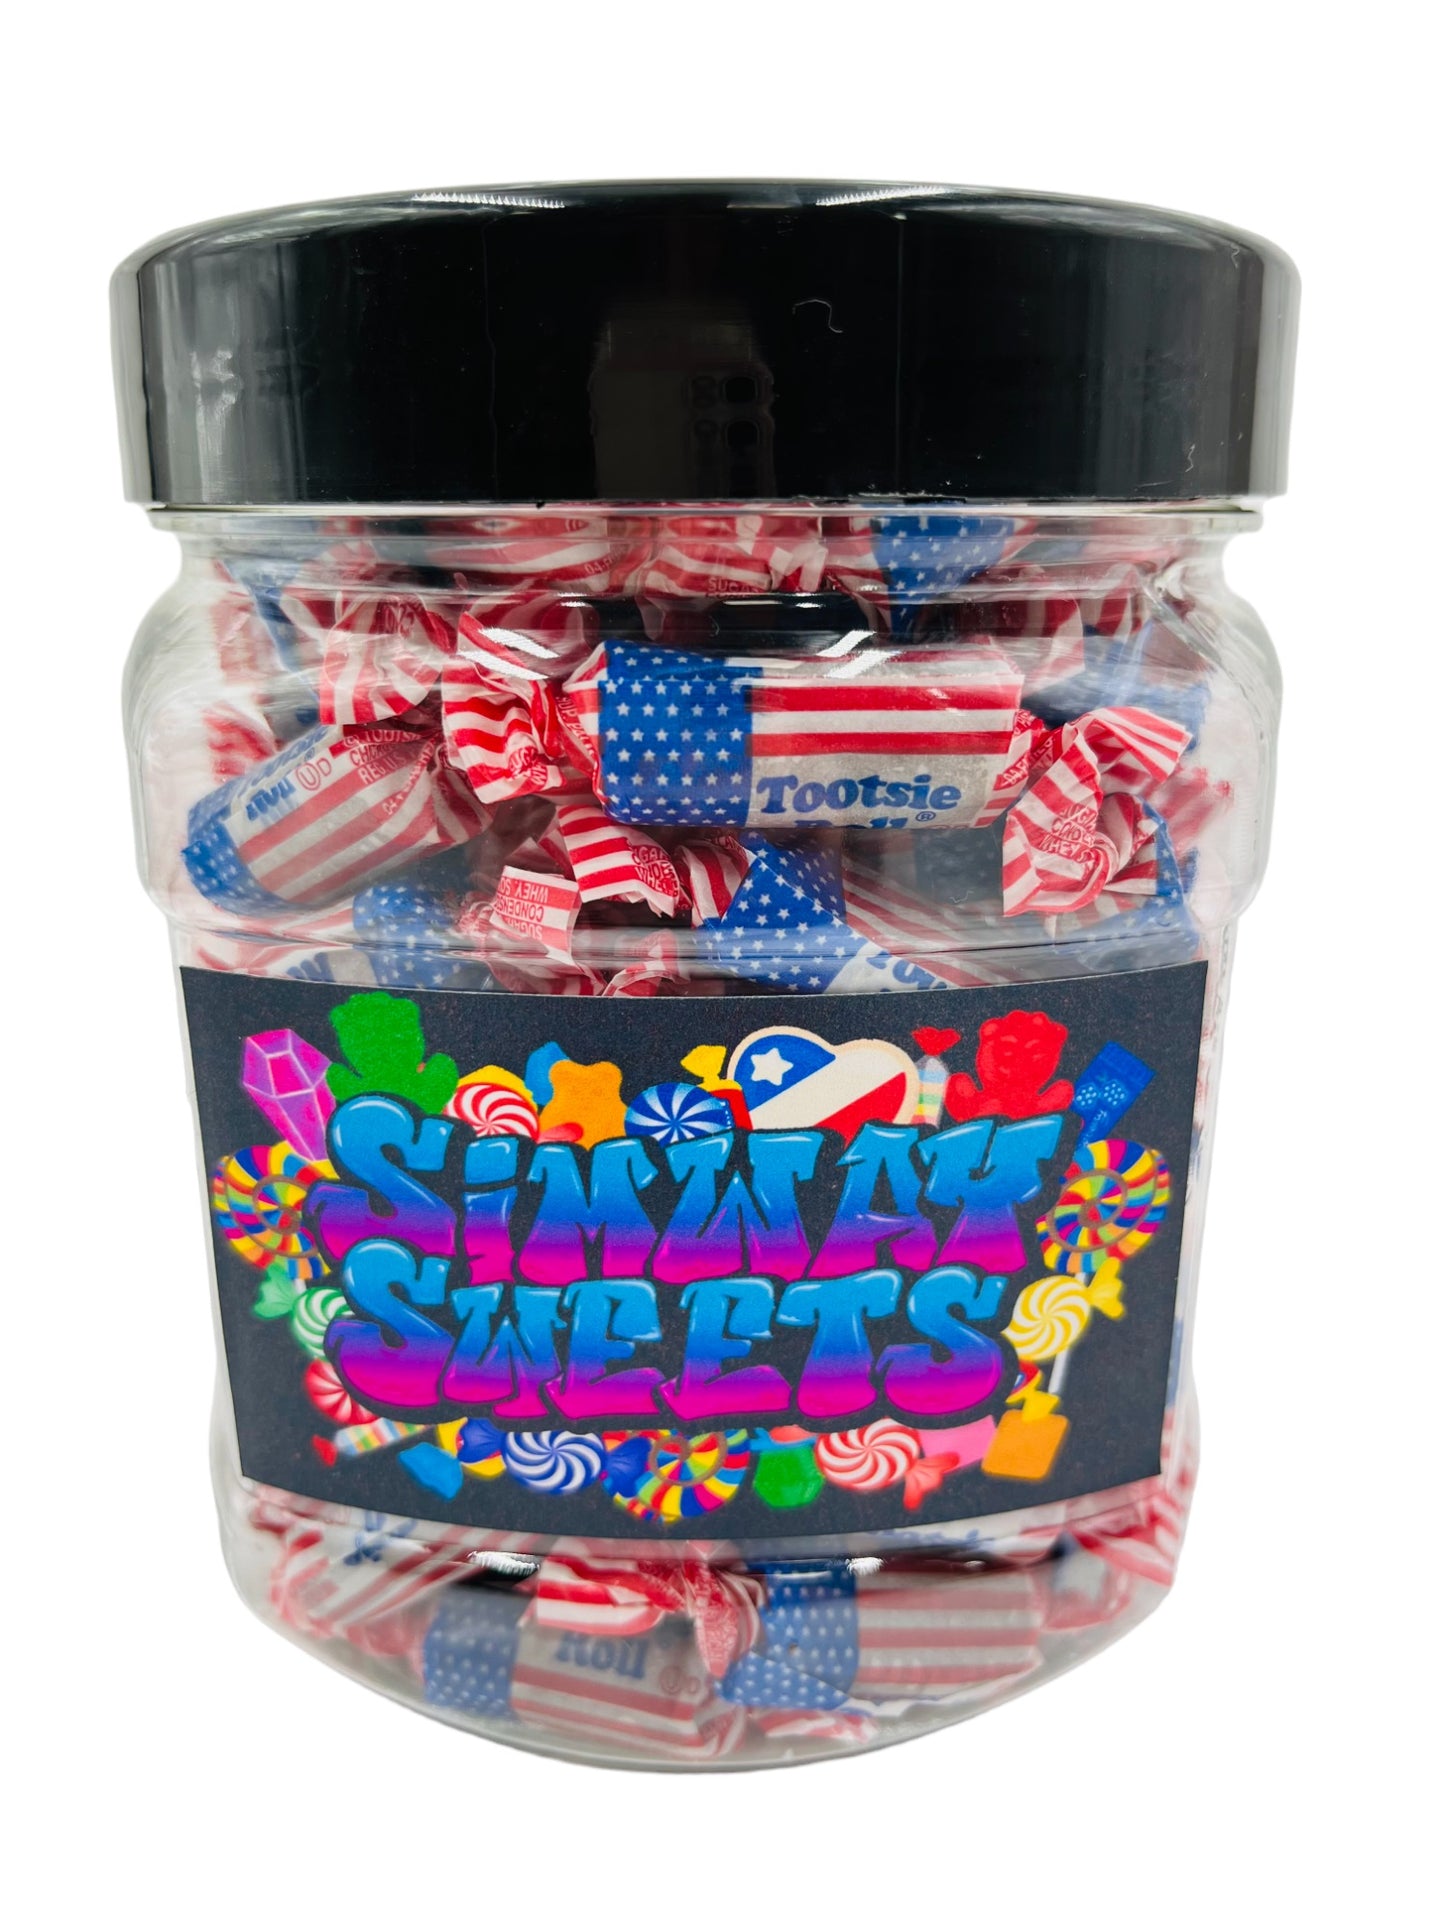 Simway Sweets Jar 760g - Tootsie Roll Midgees - American Sweets - Approximately 100 Pieces